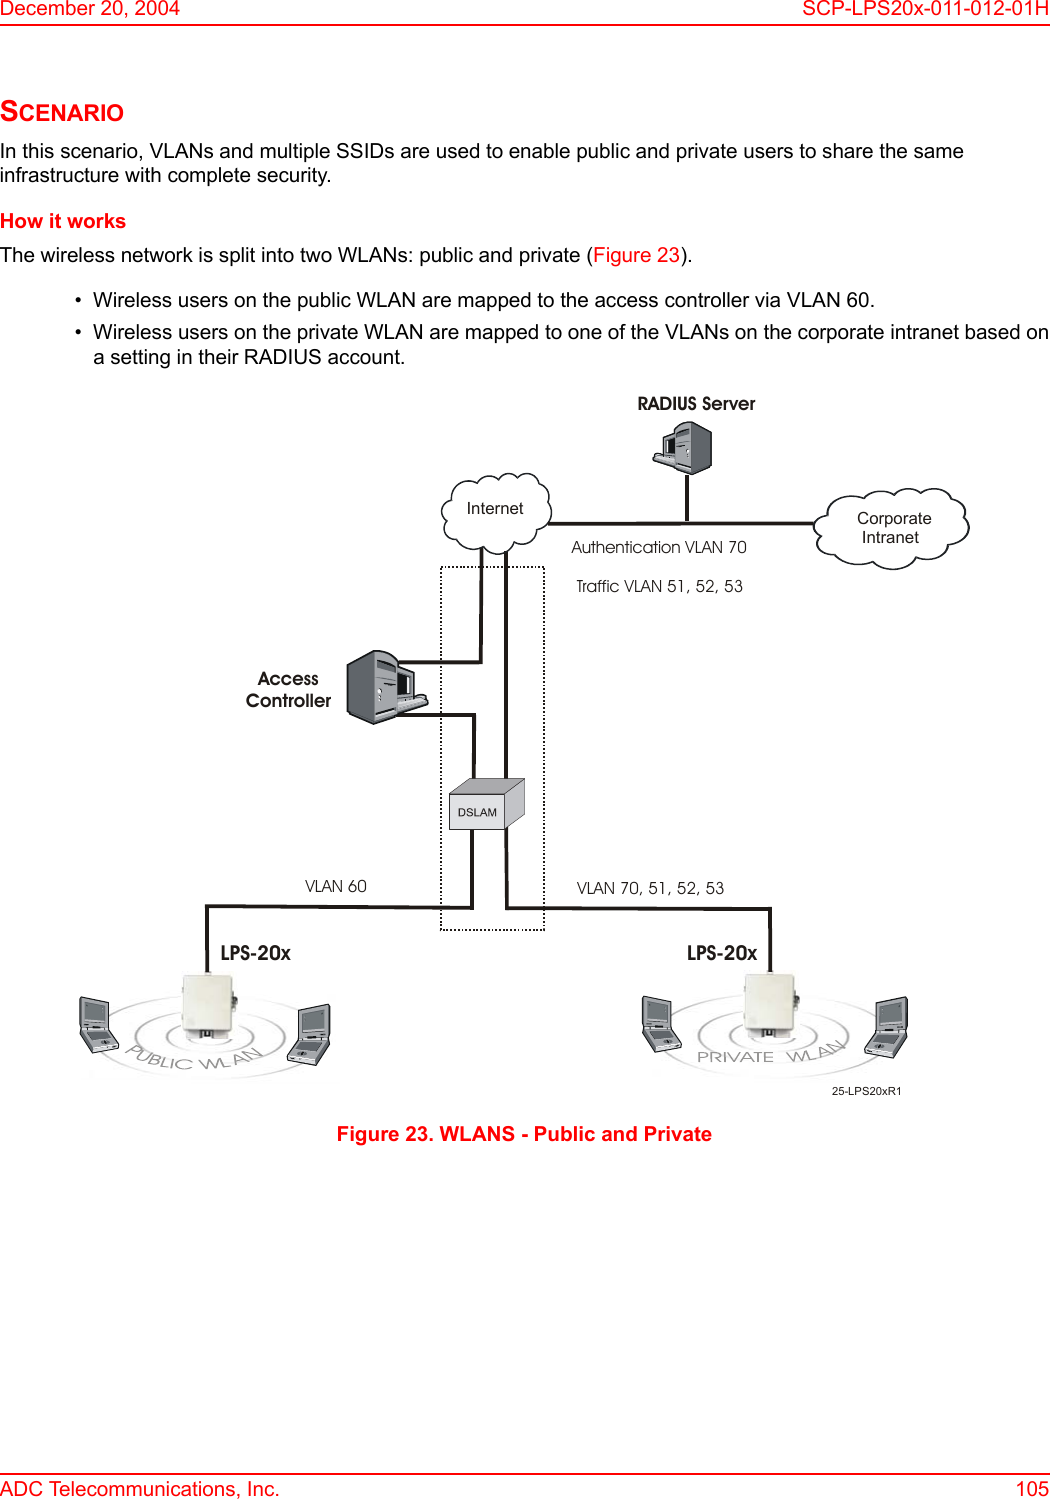 December 20, 2004 SCP-LPS20x-011-012-01HADC Telecommunications, Inc. 105SCENARIO In this scenario, VLANs and multiple SSIDs are used to enable public and private users to share the same infrastructure with complete security.How it worksThe wireless network is split into two WLANs: public and private (Figure 23).• Wireless users on the public WLAN are mapped to the access controller via VLAN 60.• Wireless users on the private WLAN are mapped to one of the VLANs on the corporate intranet based ona setting in their RADIUS account.Figure 23. WLANS - Public and Private25-LPS20xR1LPS-20x LPS-20xAccessControllerInternet Corporate IntranetRADIUS ServerVLAN 60 Authentication VLAN 70Traffic VLAN 51, 52, 53VLAN 70, 51, 52, 53 